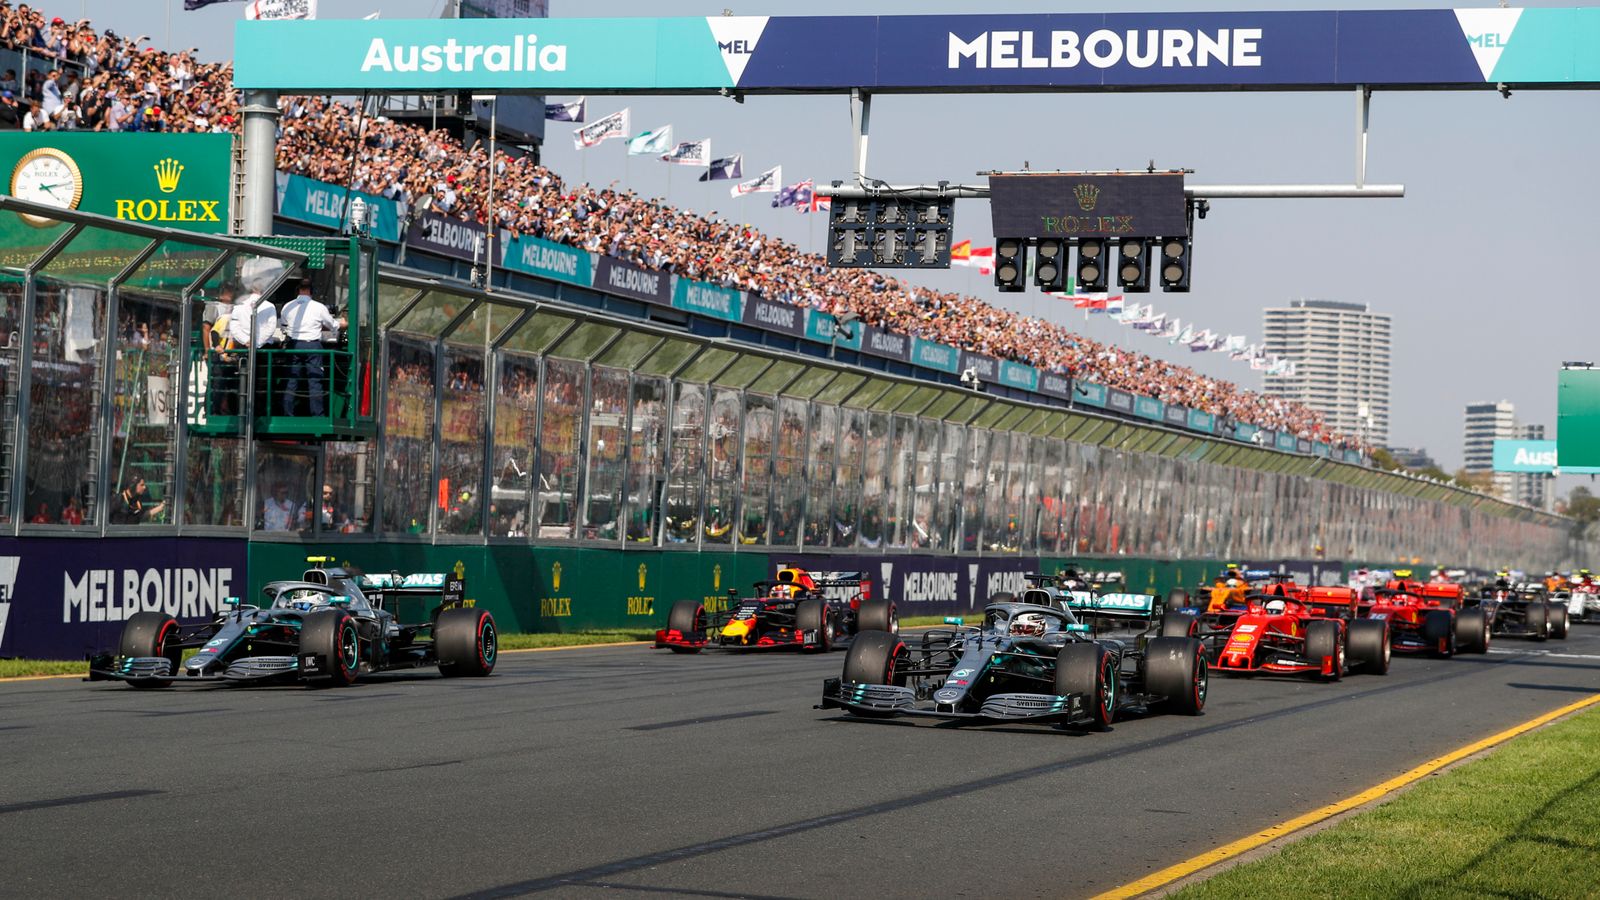 cancellation of the 2020 Australian GP at the last minute costs the government £25 million